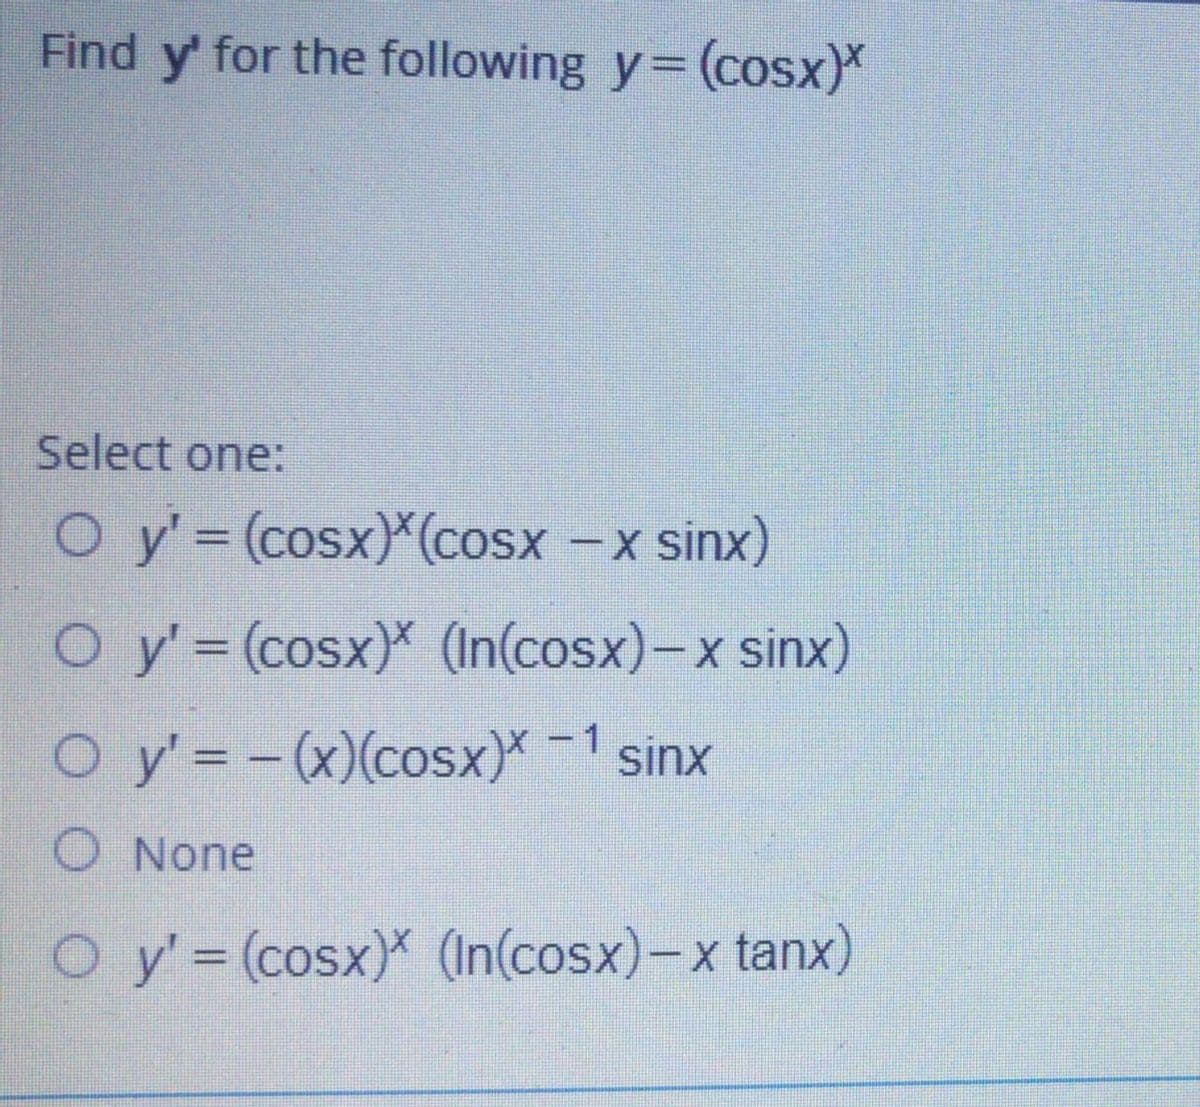 Find y' for the following y= (cosx)*
Select one:
O y' (cosx)*(cosx -x sinx)
%3D
O y'= (cosx)* (In(cosx)-x sinx)
O y' = -(x)(cosx)*-1 sinx
%3D
O None
O y' (cosx)* (In(cosx)-x tanx)
